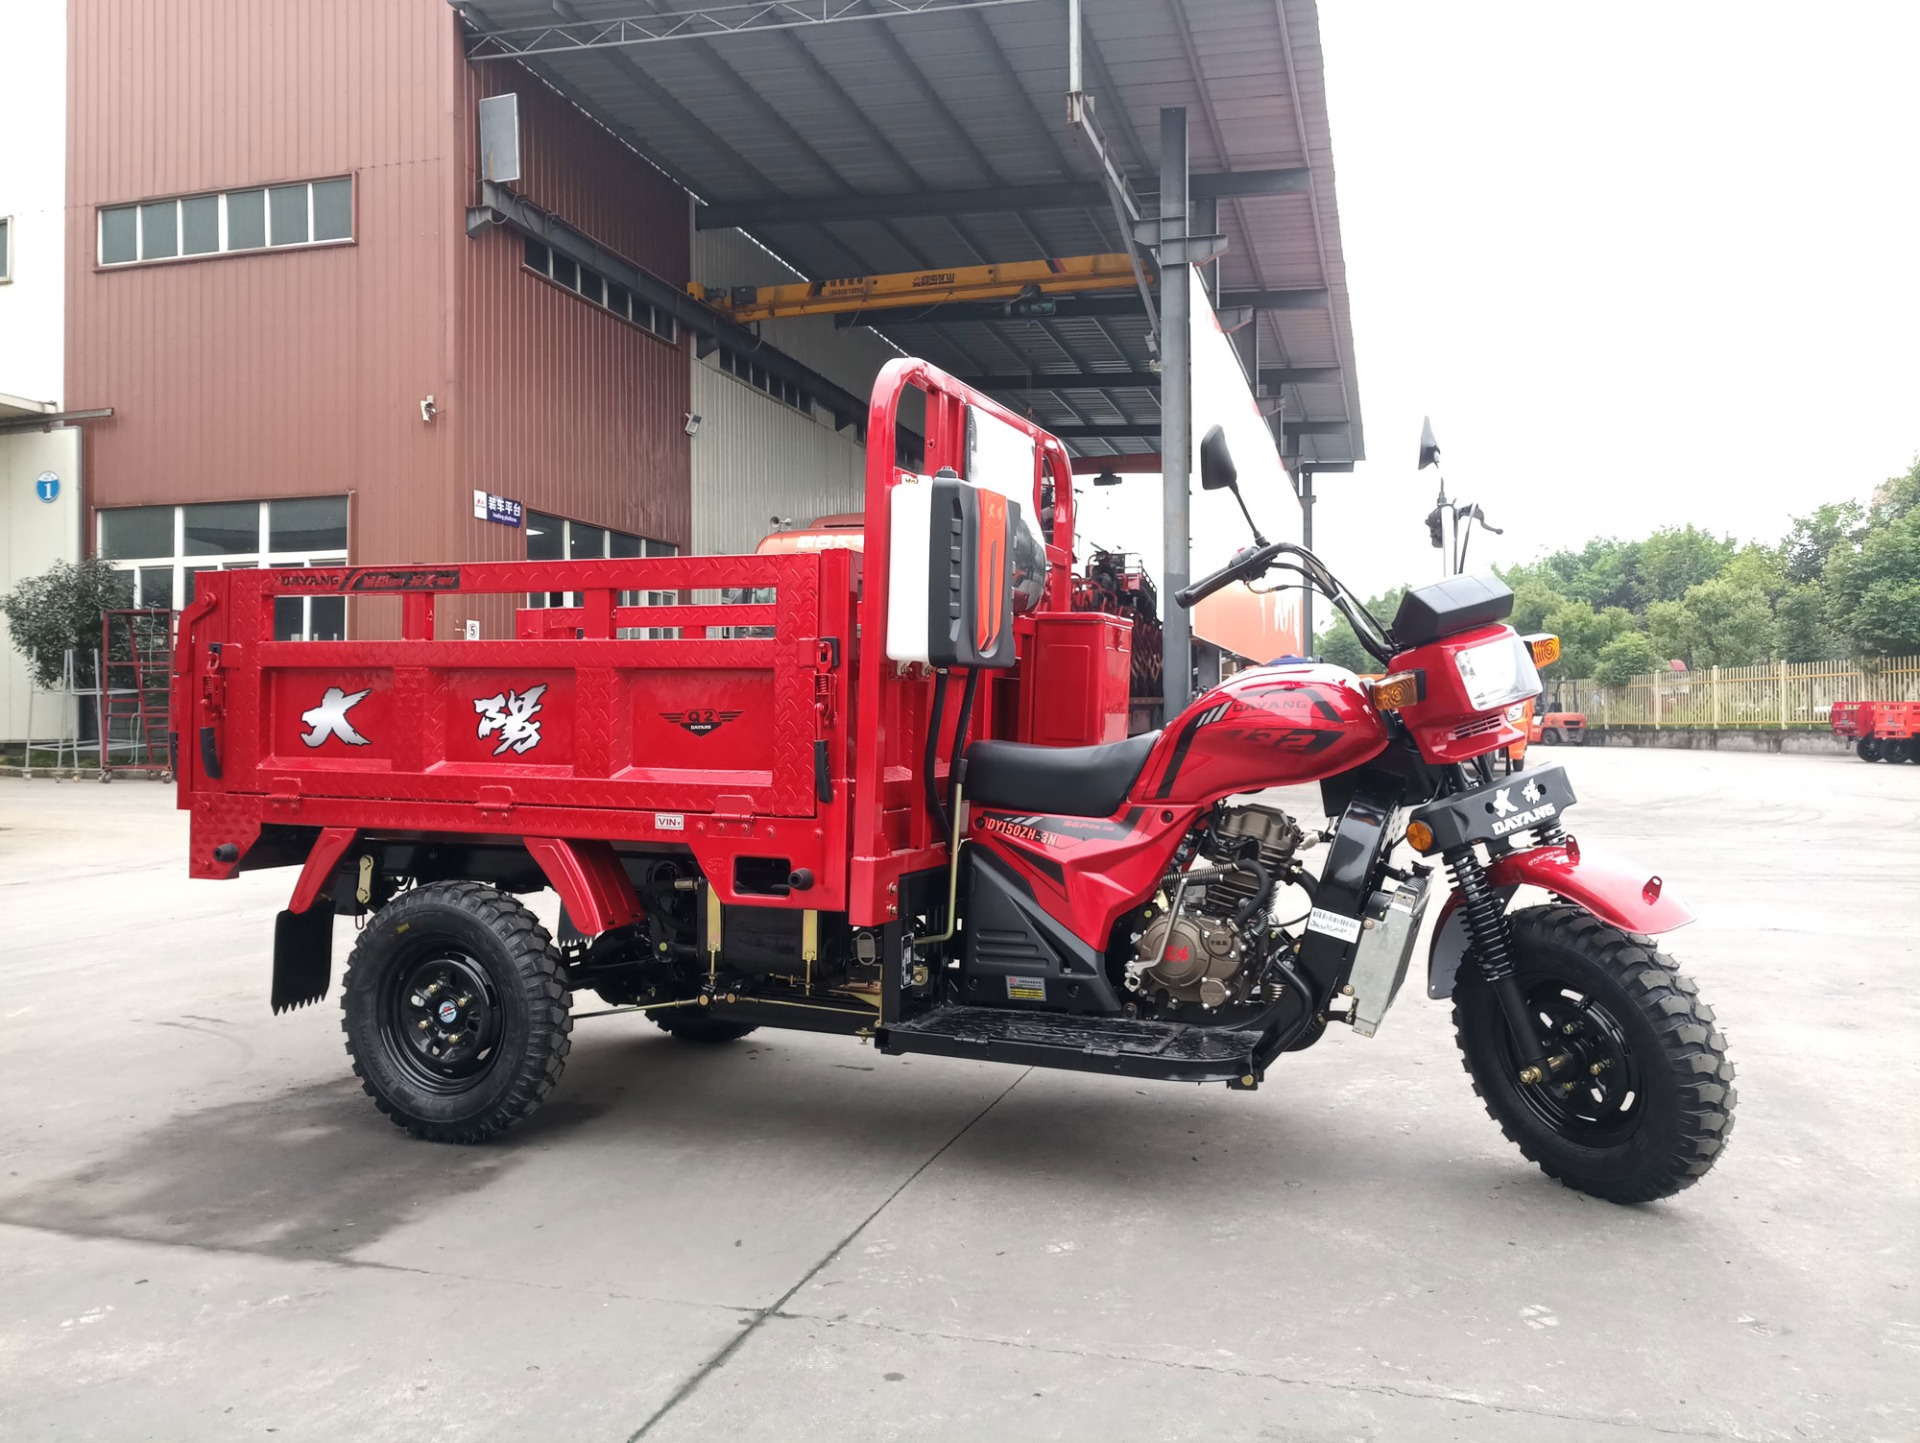 DY-WJ1 Hot-selling cargo tricycle with hydraulic lifting system